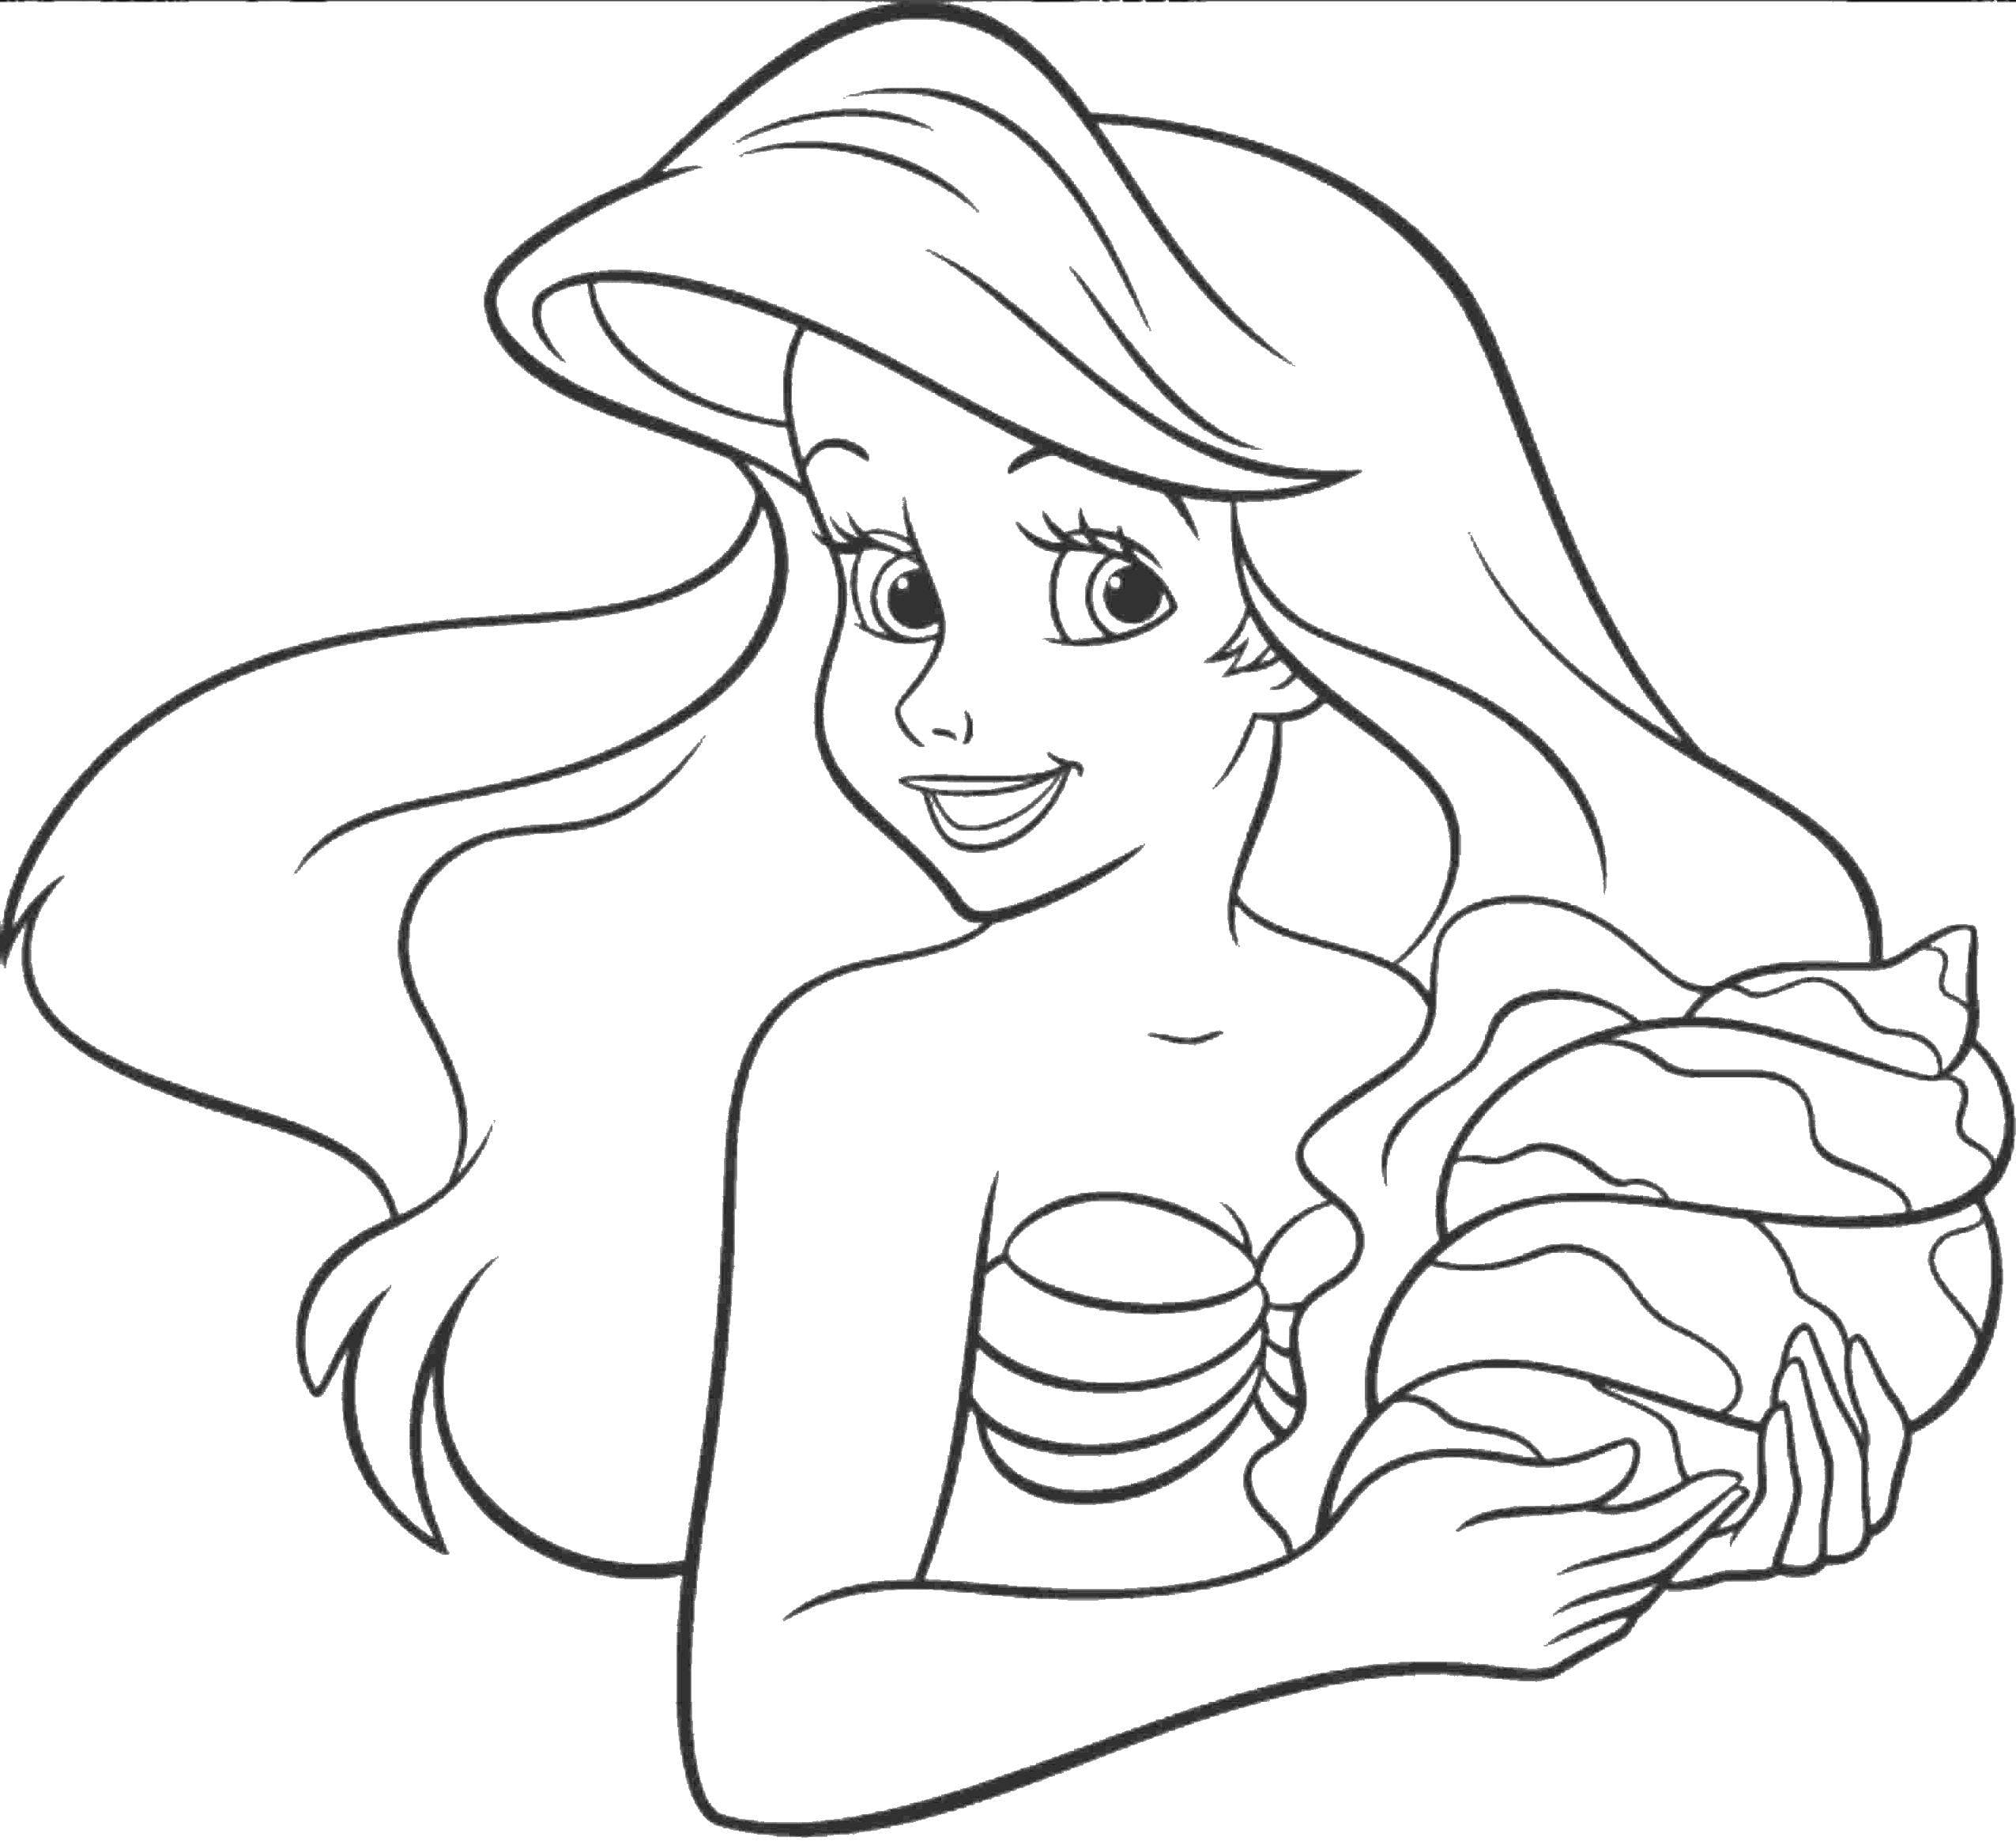 Little Mermaid Ariel Coloring Pages. Print for girls, beautiful images